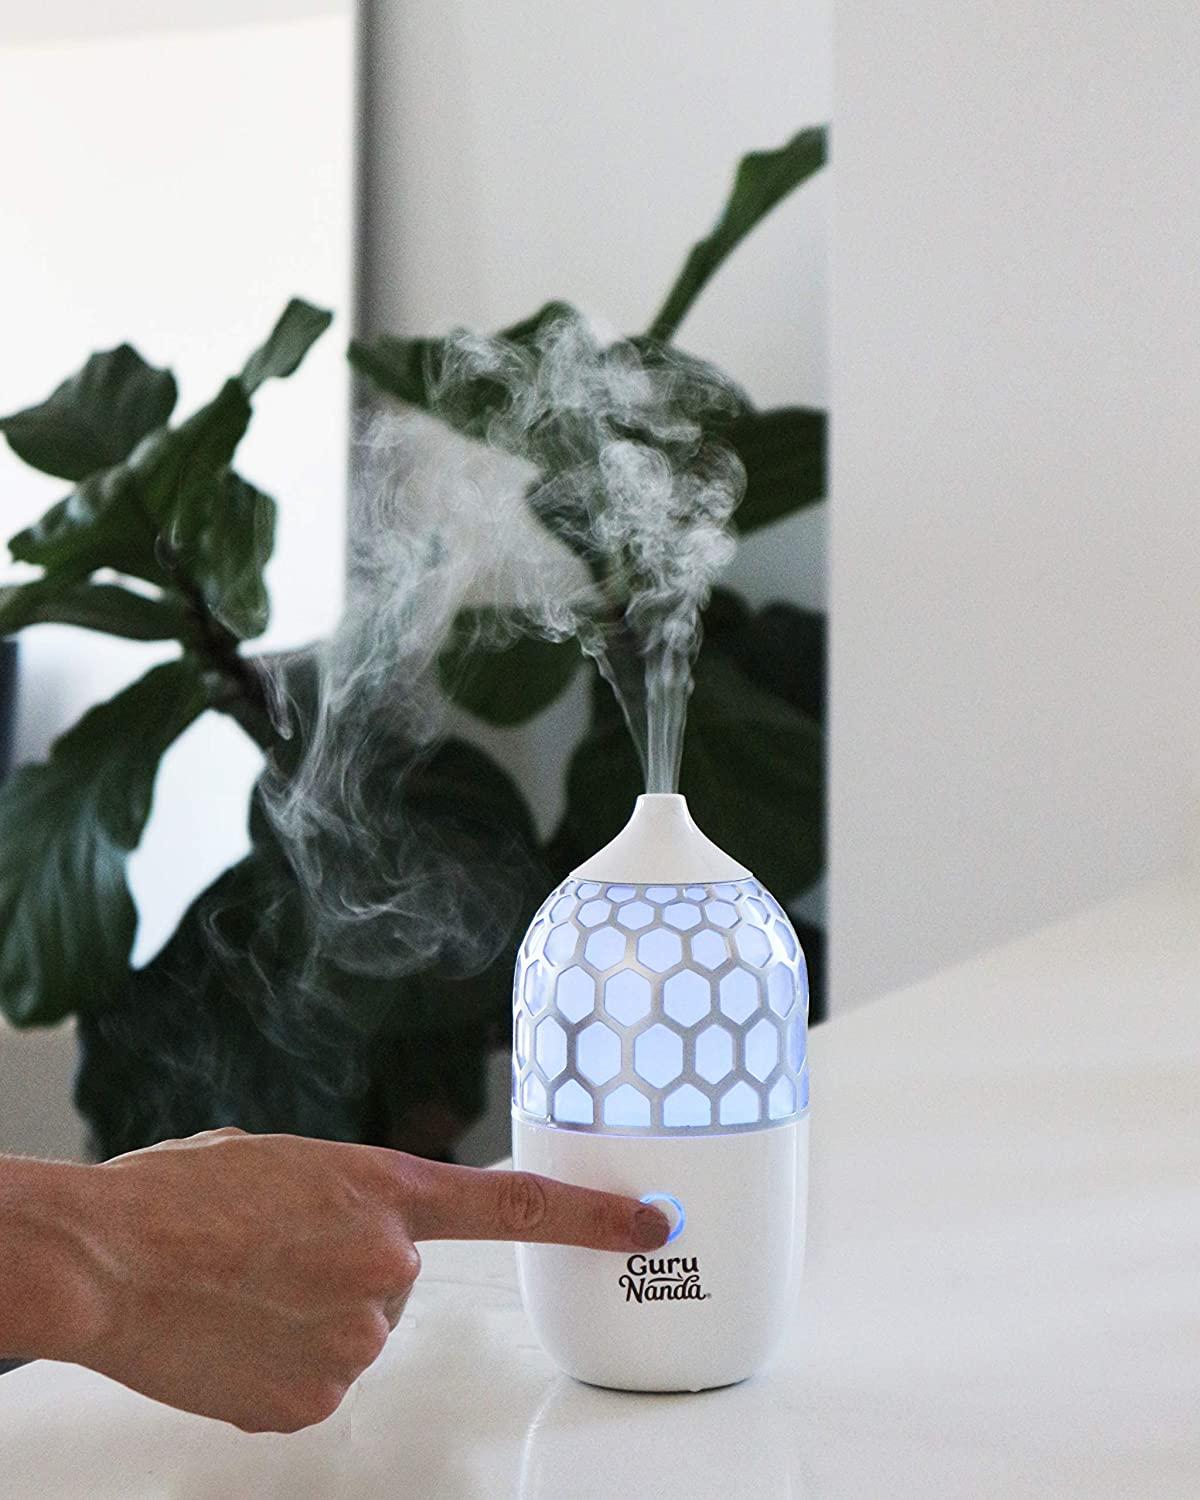 Essential Oils You Can Use For Your Humidifier - Plant Guru